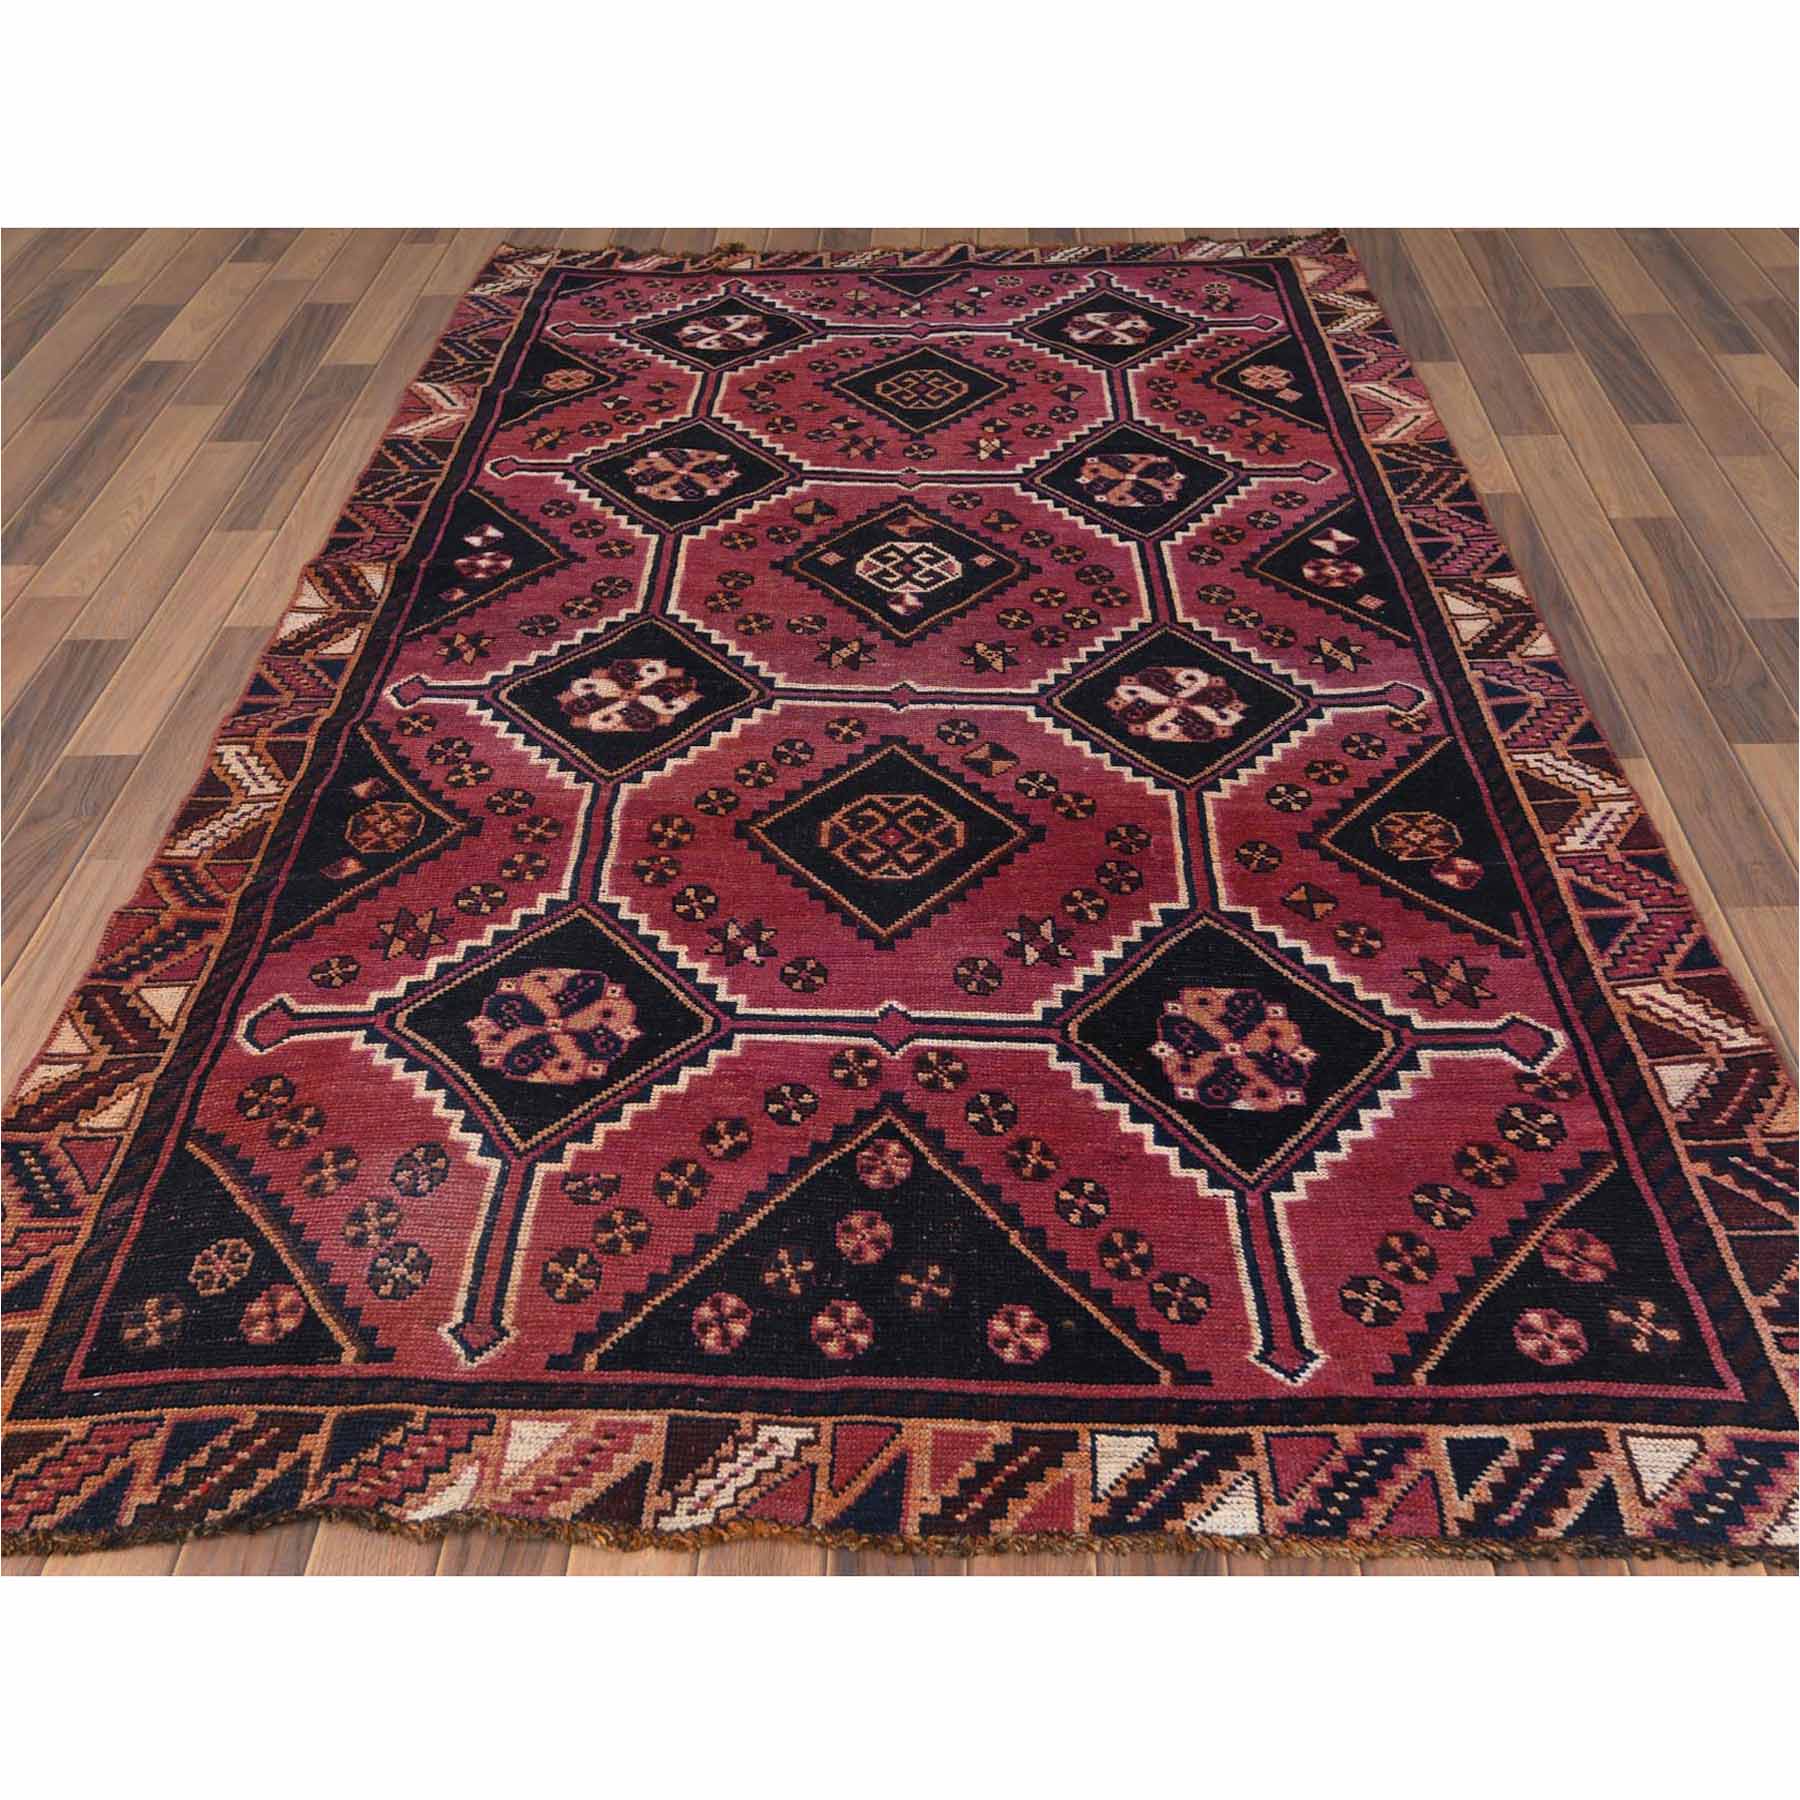 Overdyed-Vintage-Hand-Knotted-Rug-303050